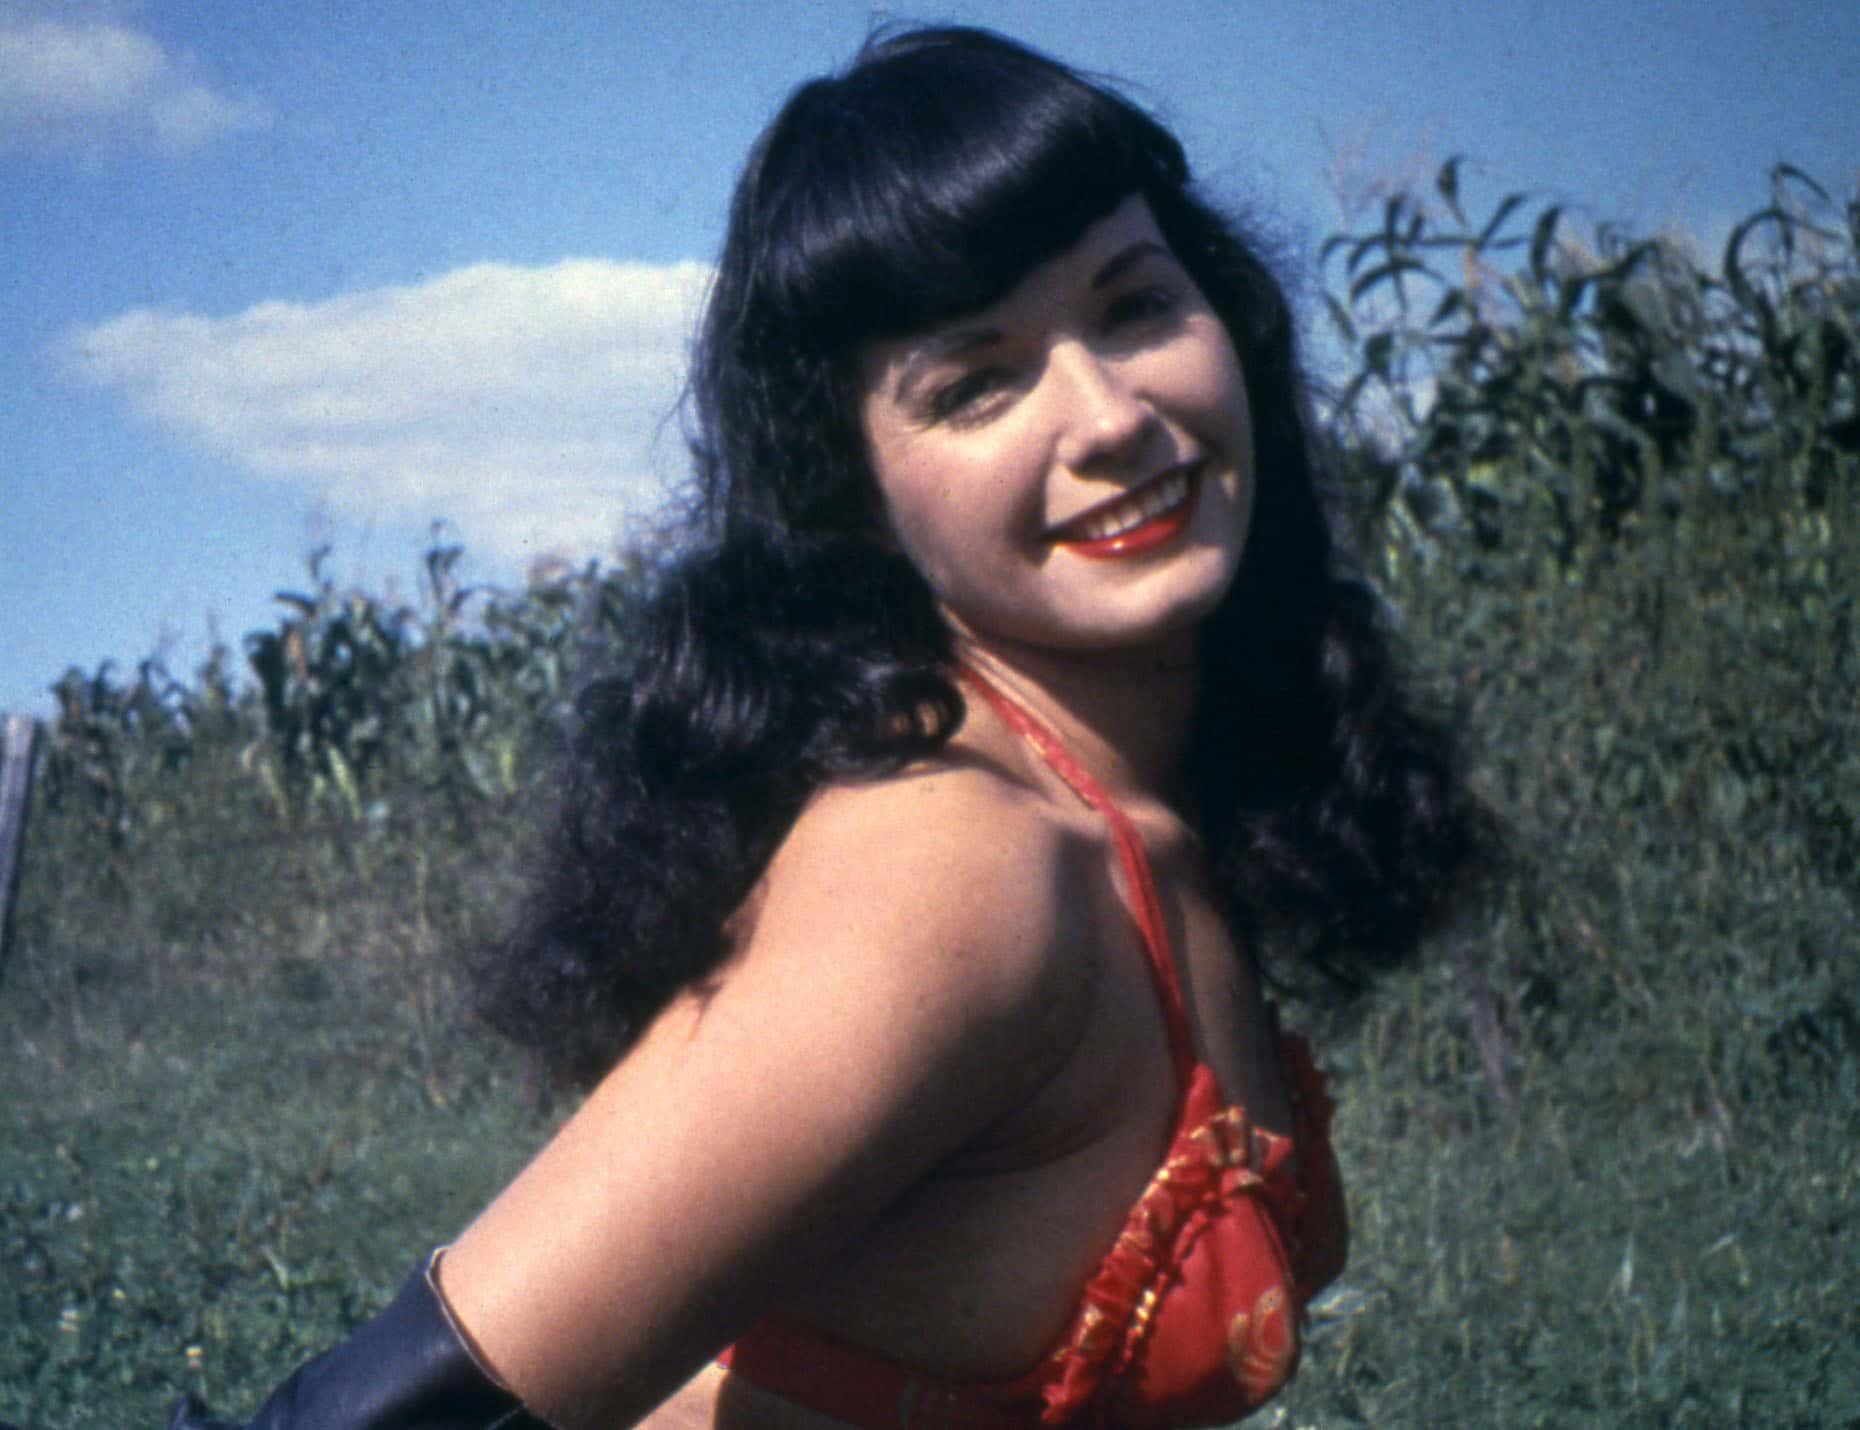 Naughty Facts About Bettie Page, The Original Pin-Up image